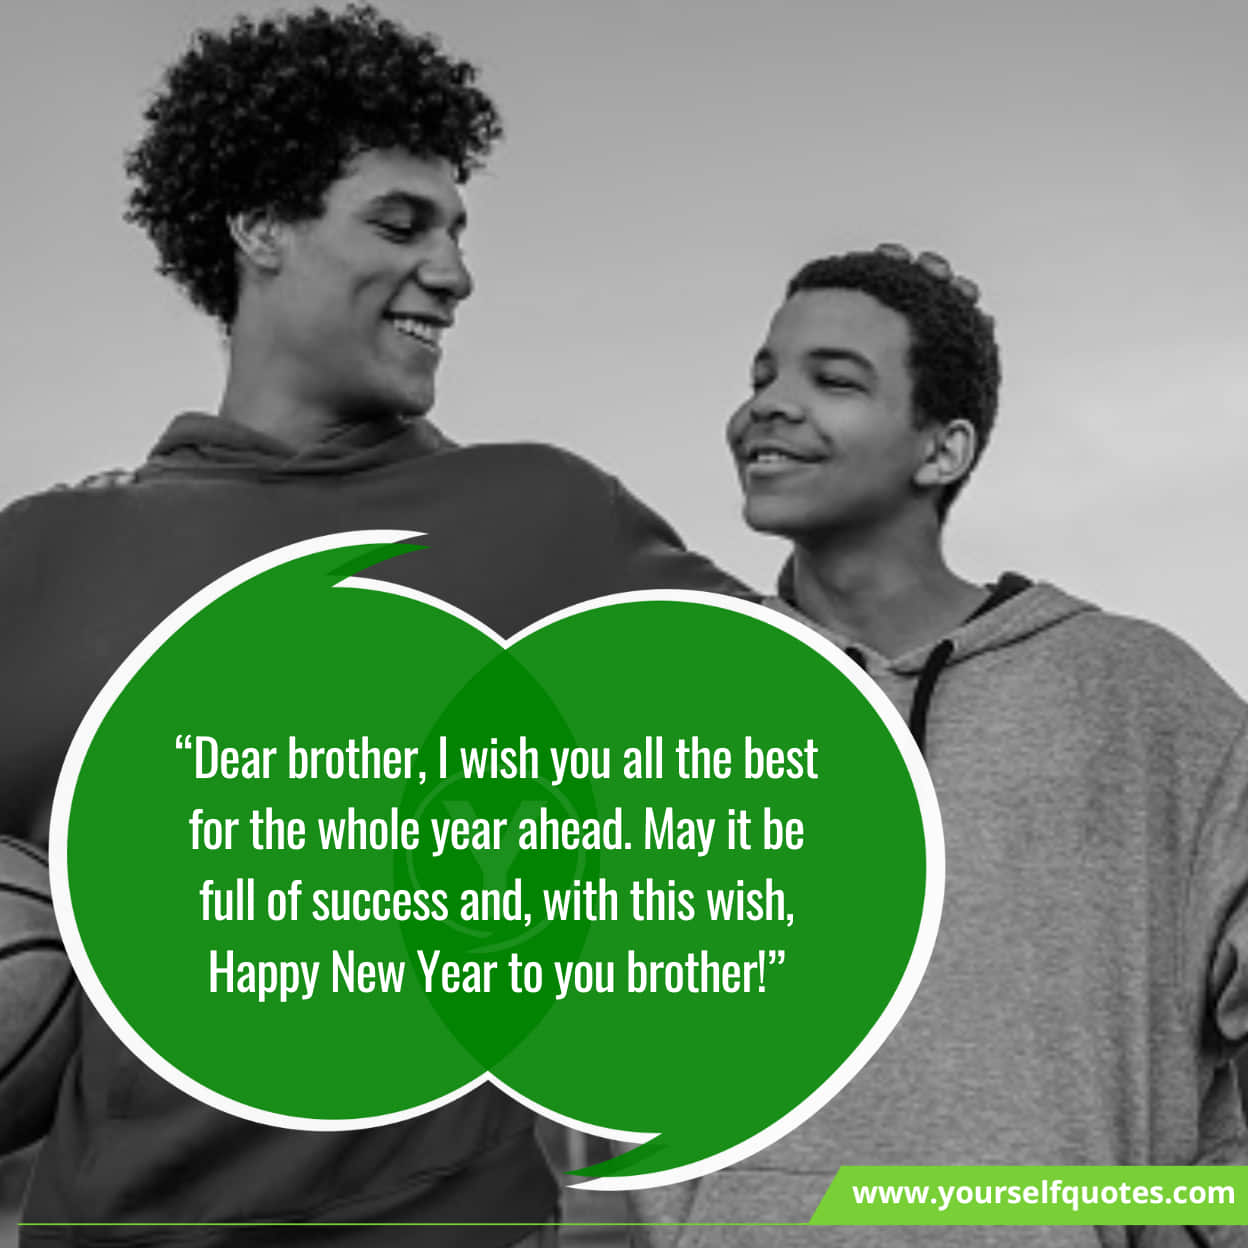 Heart-Warming New Year Wishes For Brother